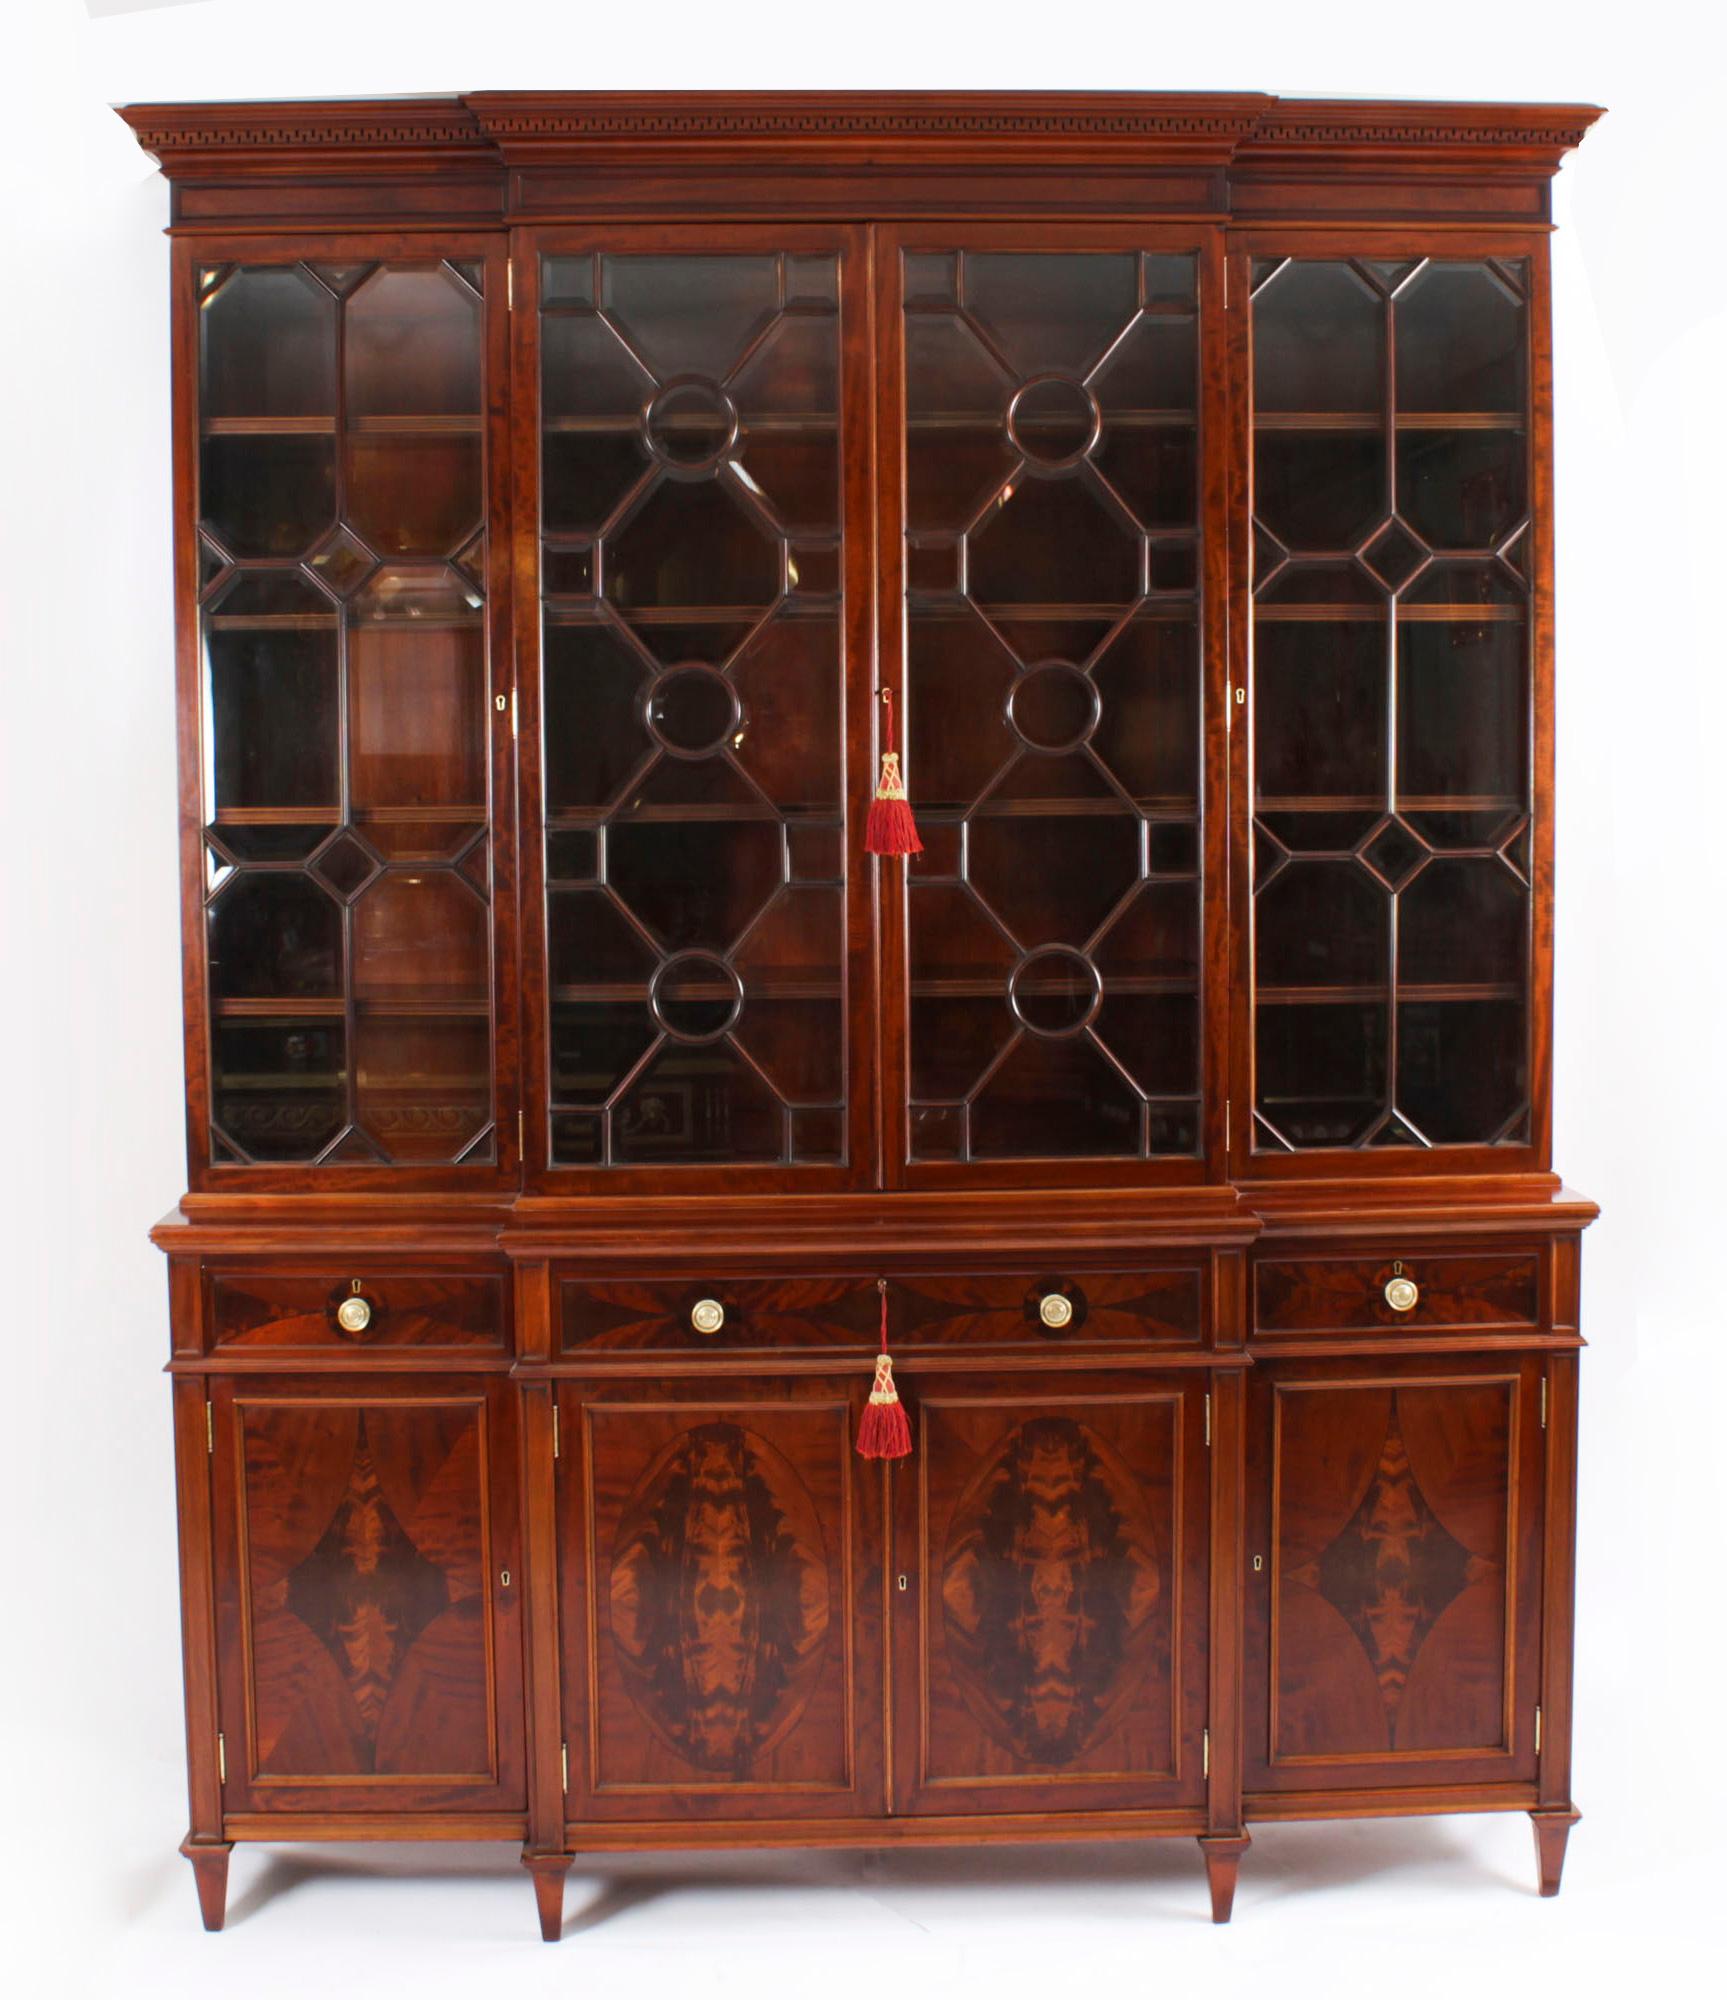 This is a beautiful antique top quality  Sheraton Revival  flame mahogany four door breakfront bookcase, masterfully crafted in rich  mahogany by the world renowned London cabinet makers, Edwards & Roberts,  Circa 1890 in date.

The bookcase